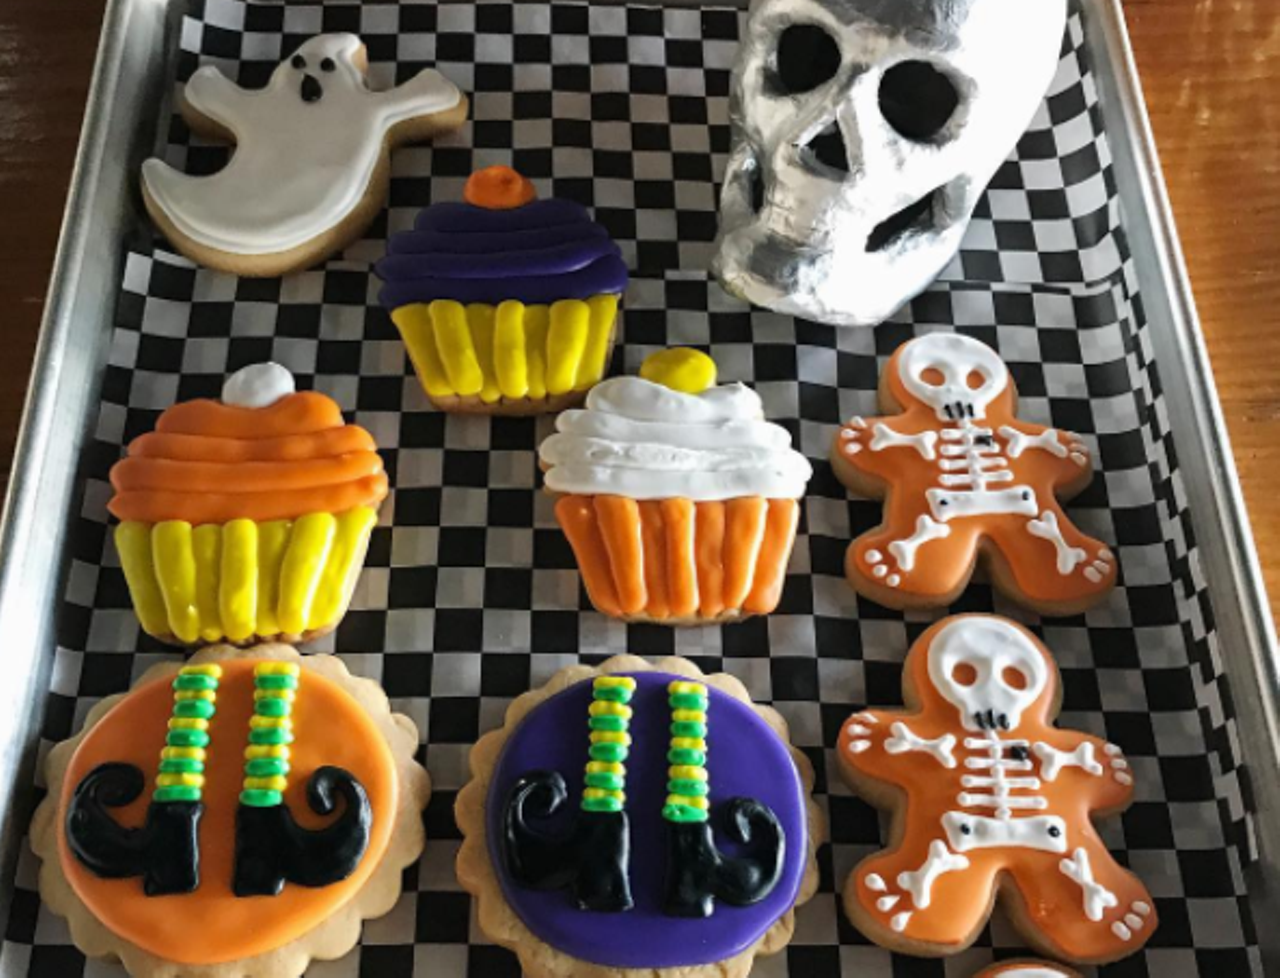 Eaton Sweet Coffee Bar
5223 McCullough Ave., (210) 492-1104, facebook.com
Eaton Sweet Coffee Bar (also known as Olmos Perk under new ownership) will make your skin crawl with their skeleton cookies.
Photo via Instagram, eatonsweetcoffee